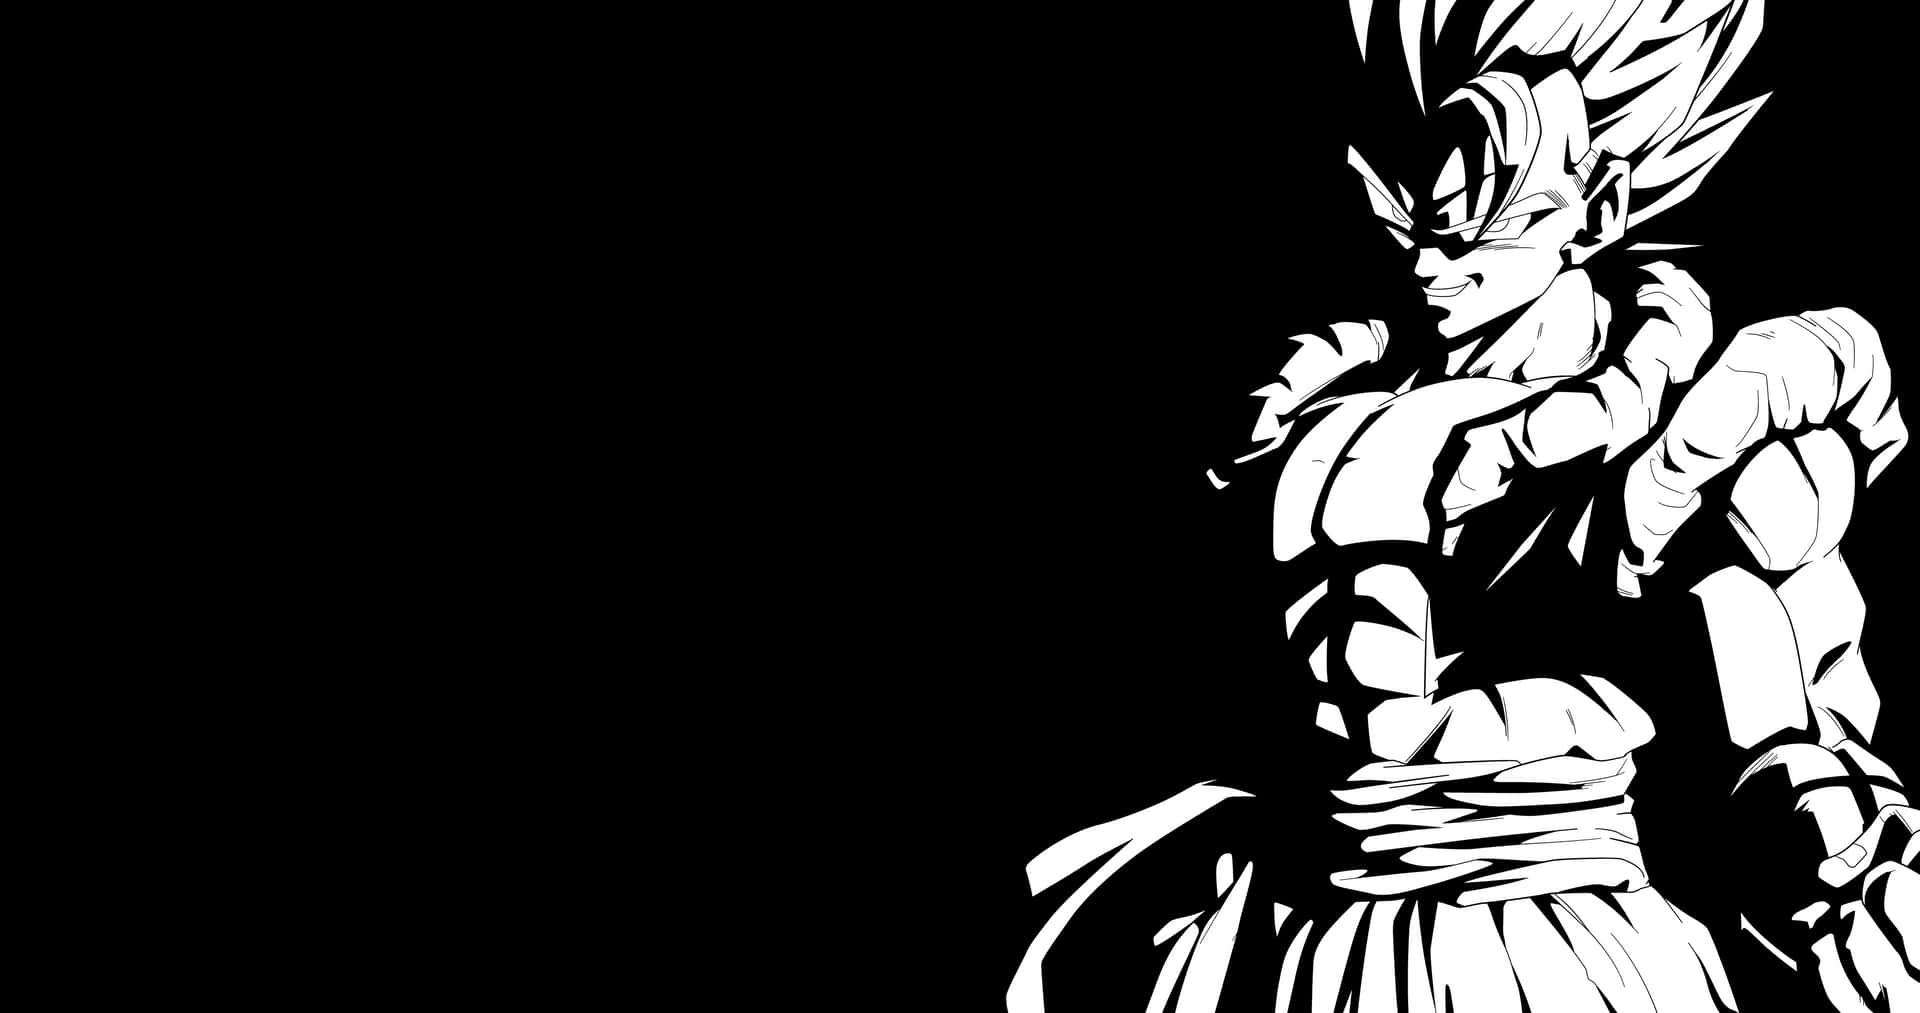 Vegeta, the iconic Dragon Ball Z character, in black and white Wallpaper